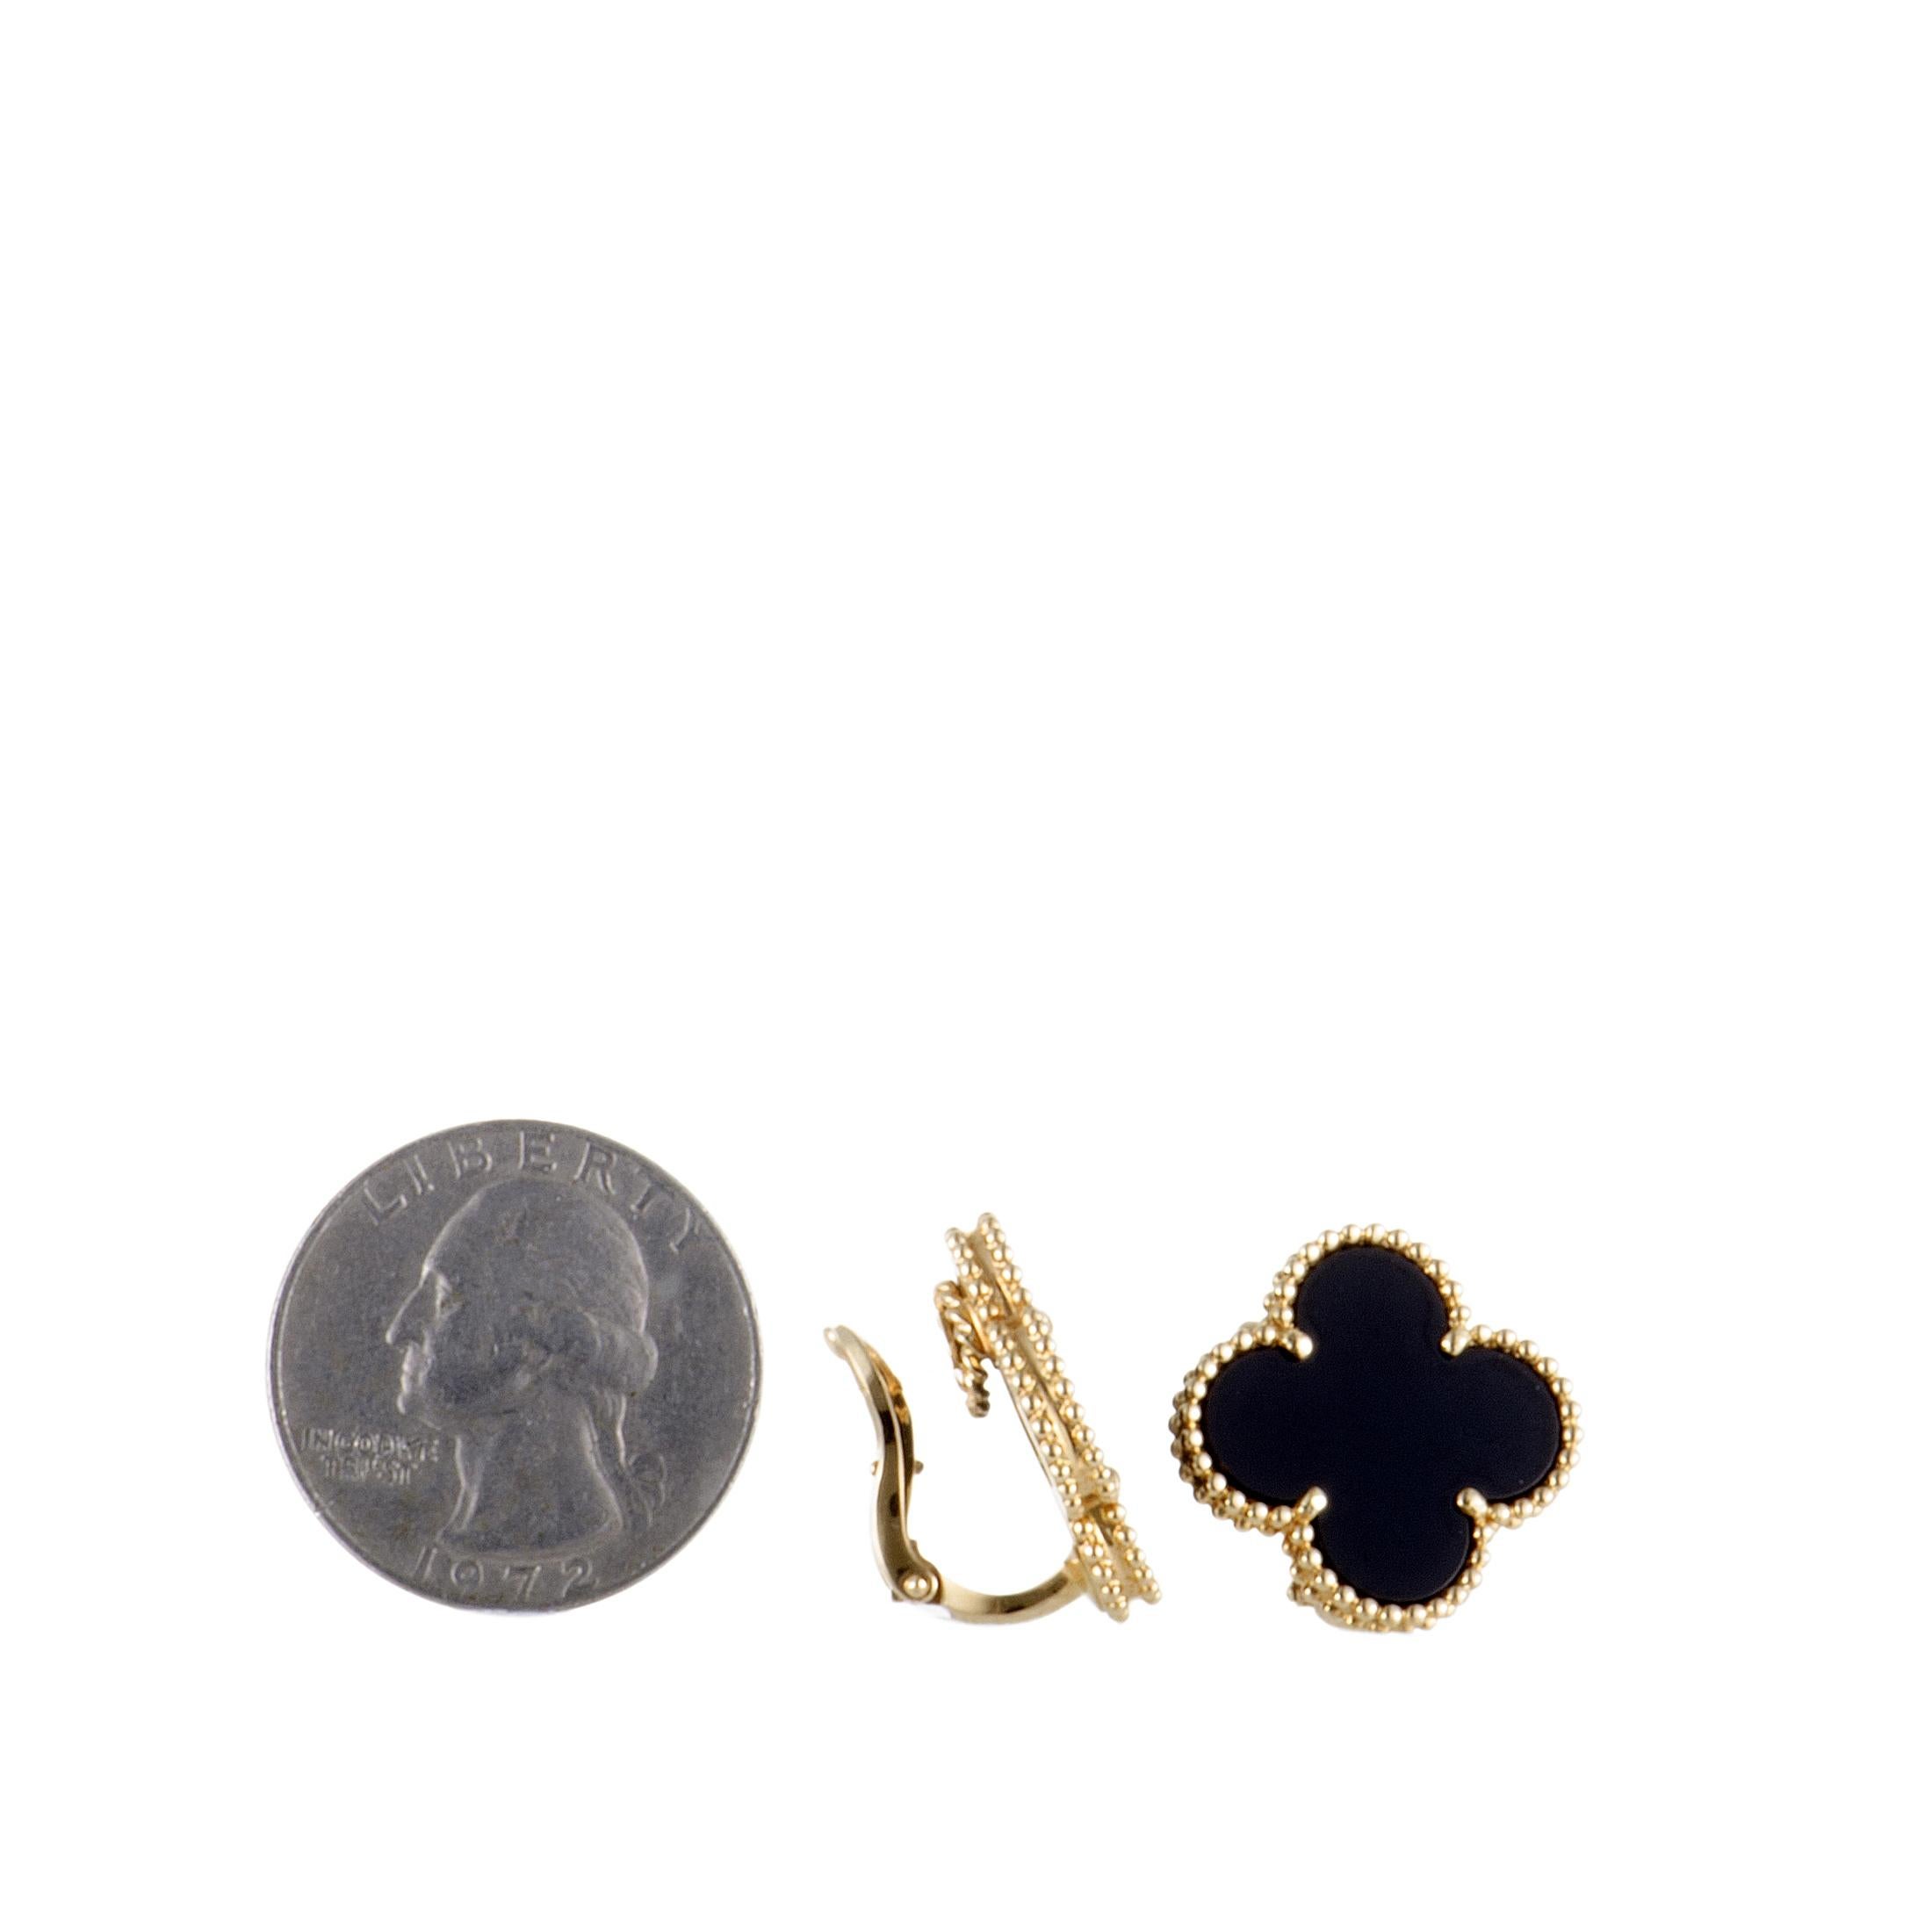 This elegant pair of Van Cleef & Arpels clip-on earrings are stunningly crafted in 18K yellow gold. Its charming design includes the iconic motif of the famous “Alhambra” collection, in the large size, filled with bold and beautiful black onyx.
